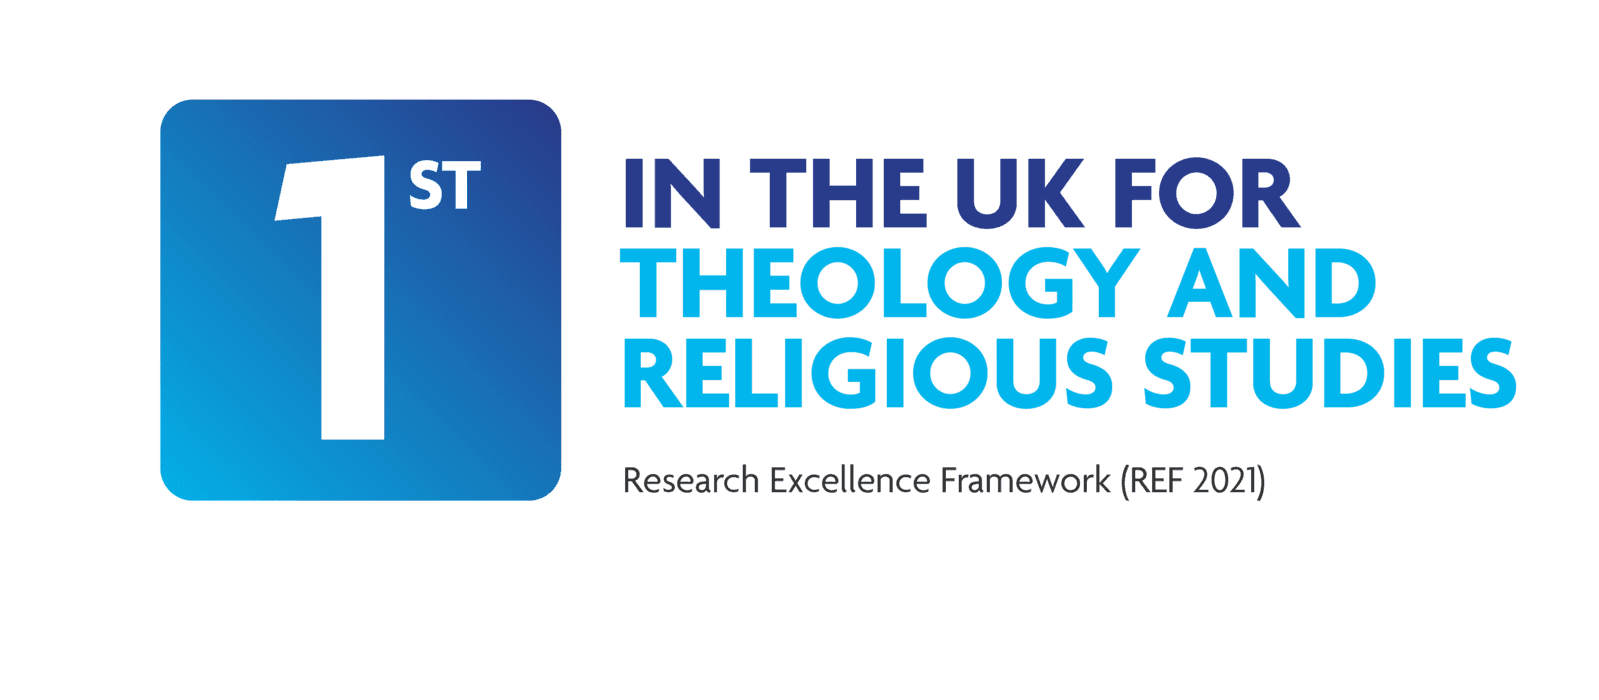 1st in the UK for Theology and Religious Studies (Research Excellence Framework 2021)